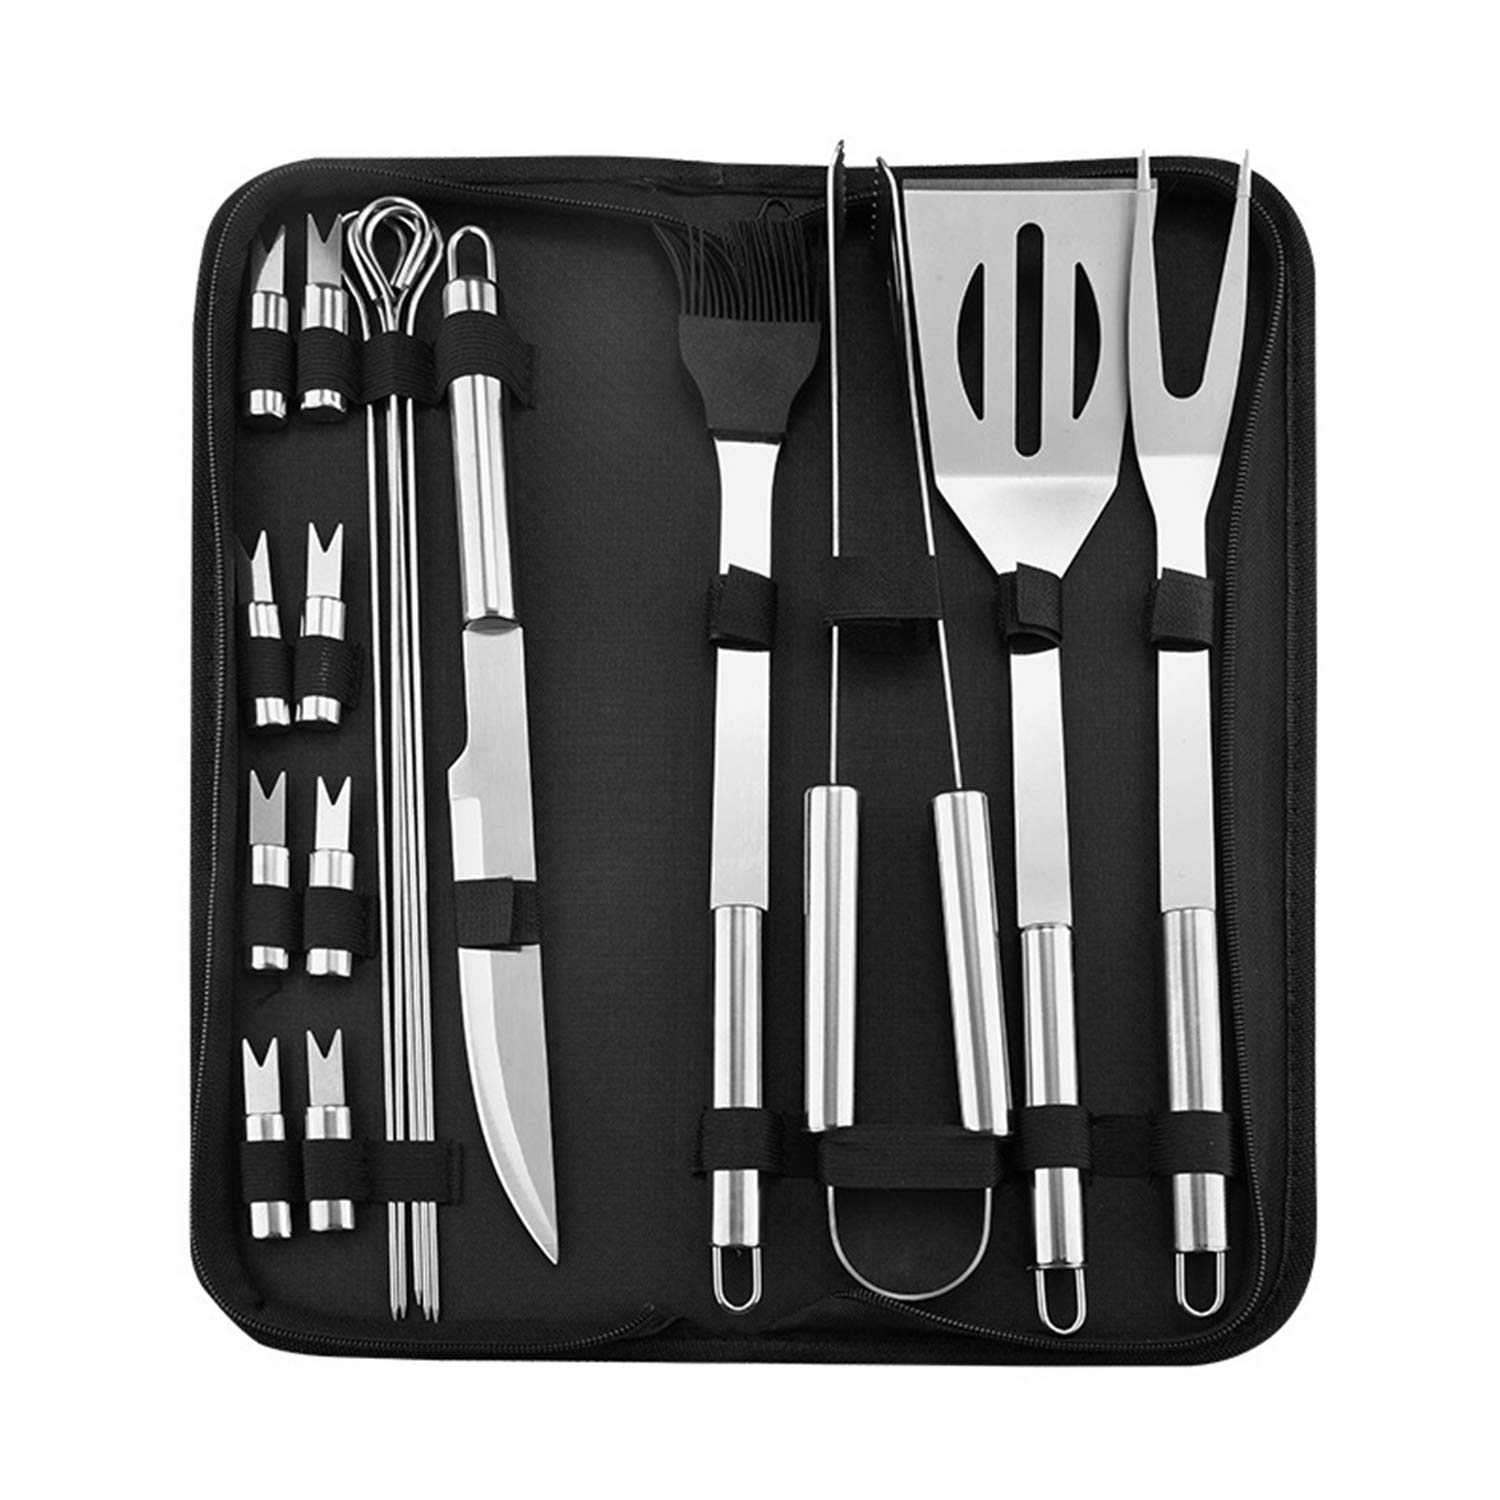 Barbecue Grilling Tools